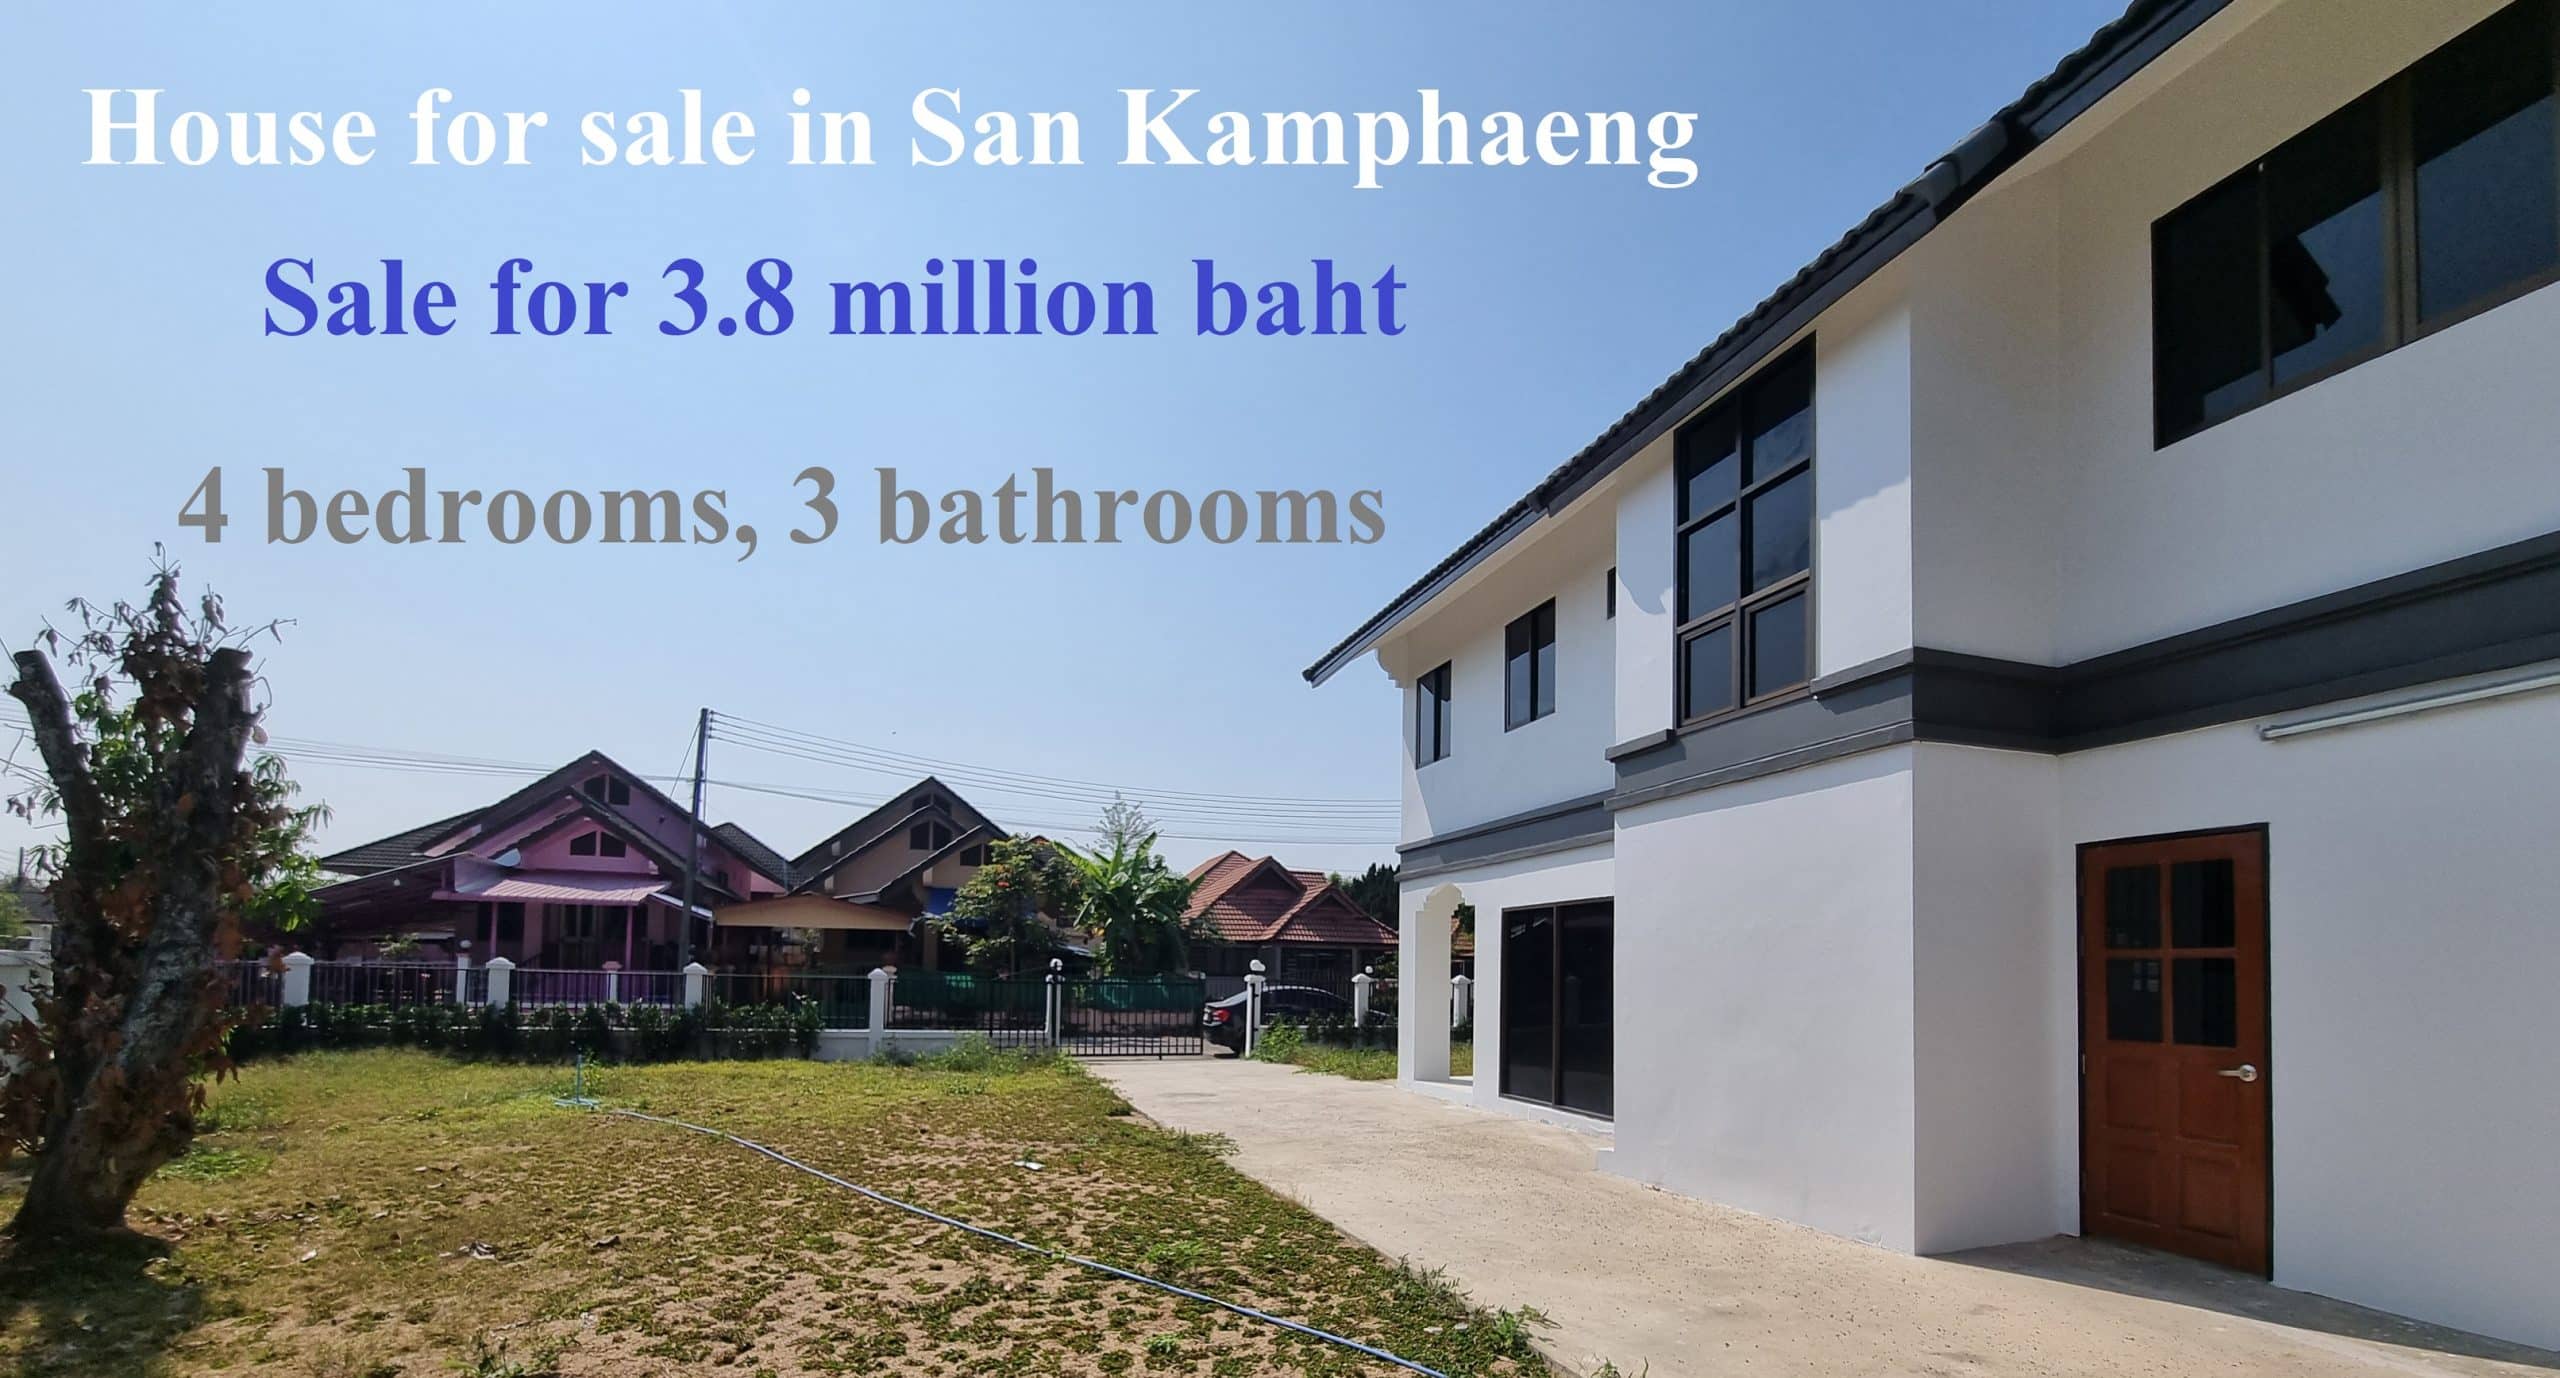 House for sale in San Kamphaeng Sale 3.8 million baht only 4 bedroom, 3 bath with area of 101 sqw.